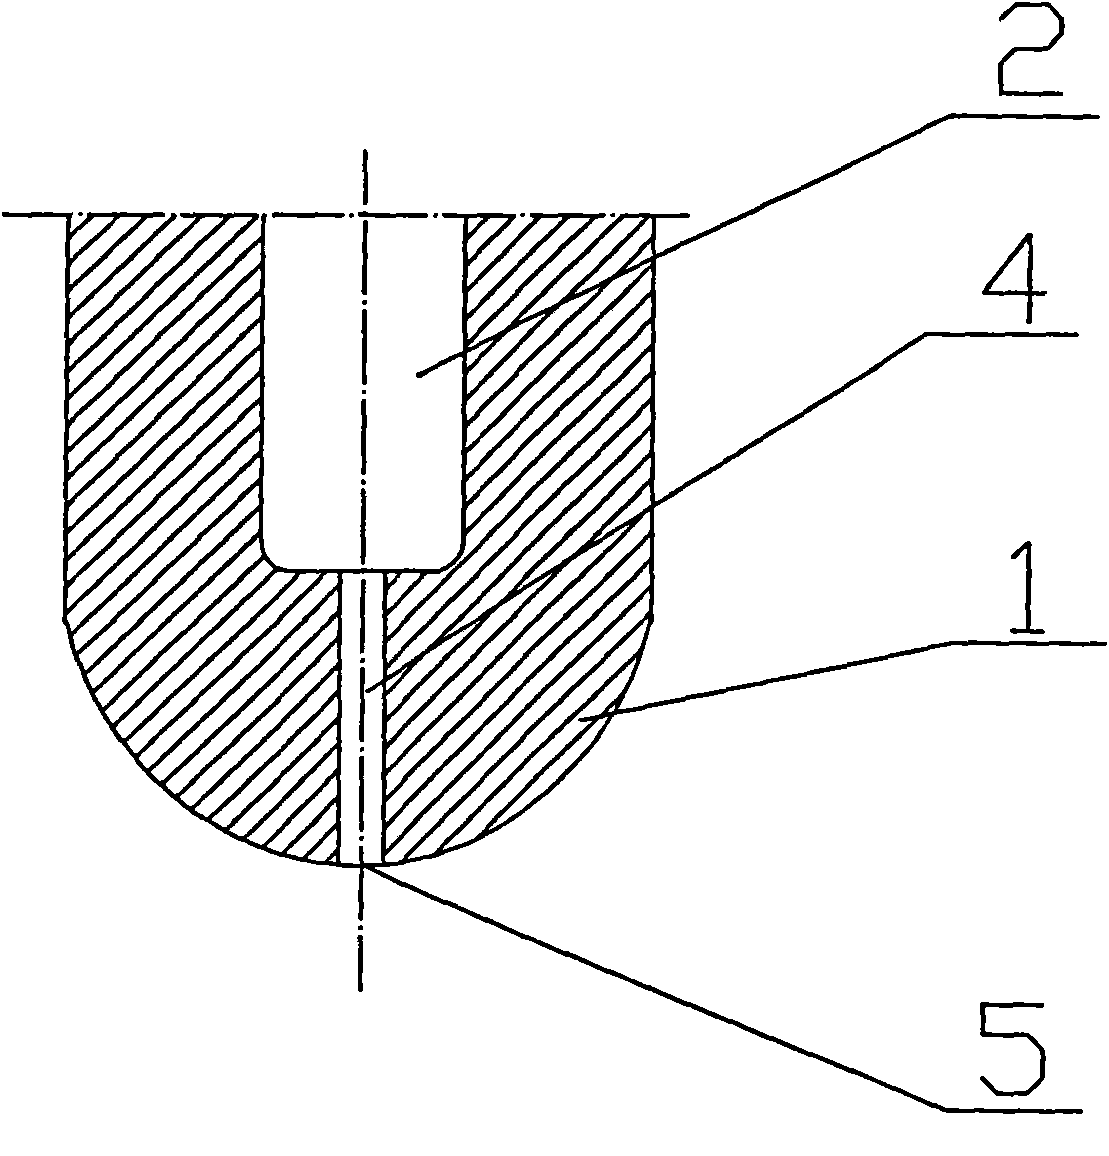 Integral type stopper capable of controlling inflow gas